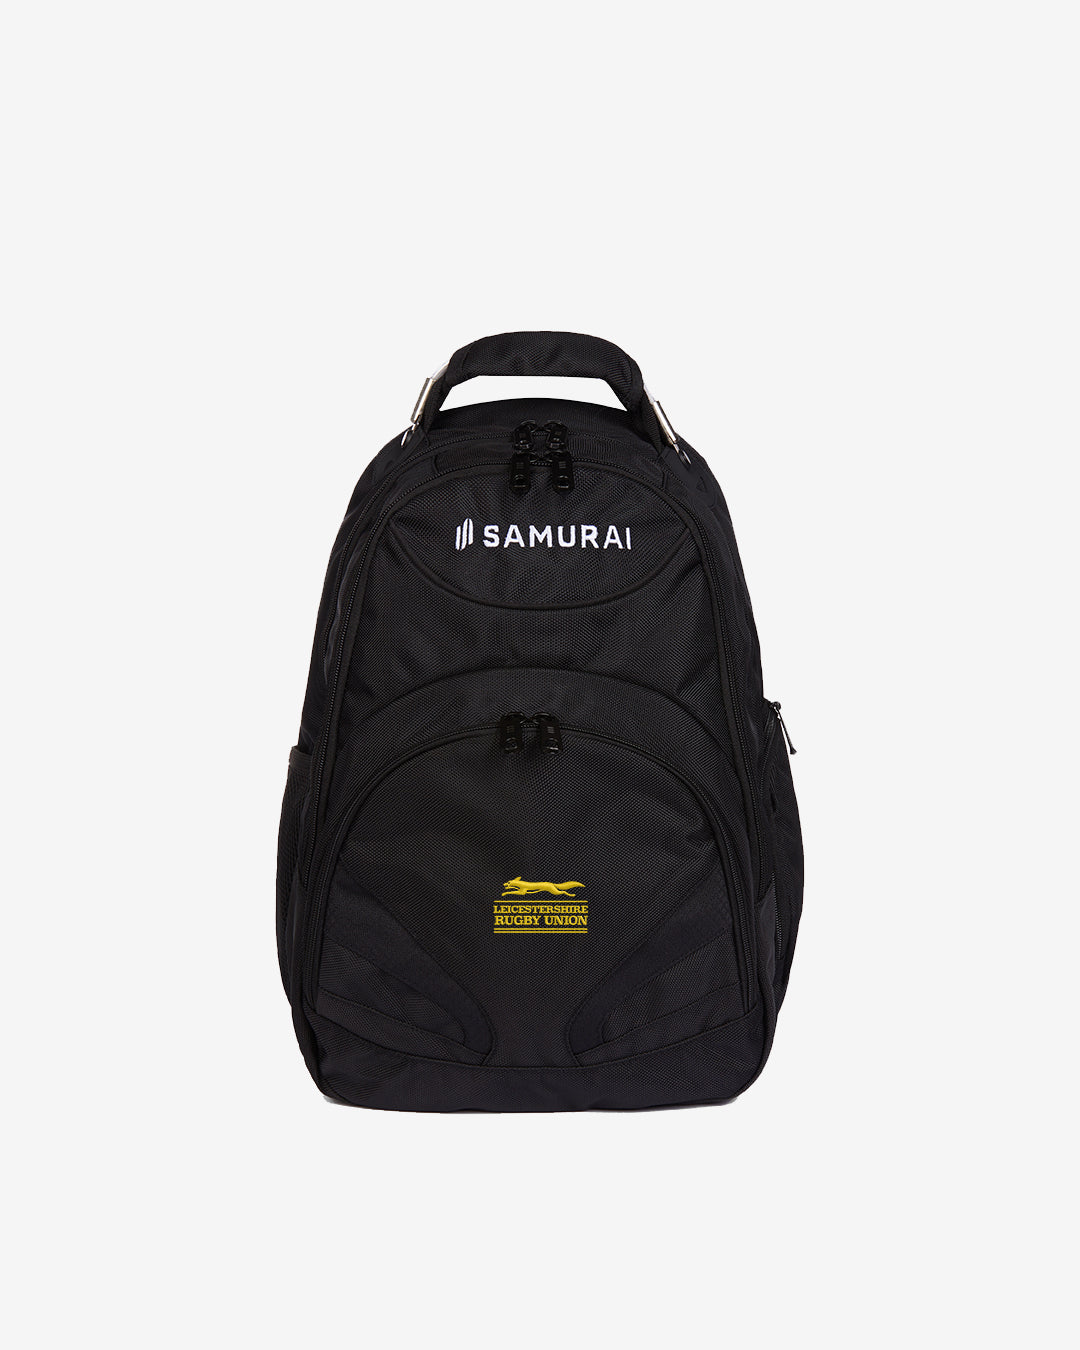 Leicestershire Rugby Union - U:0213 - Backpack - Black